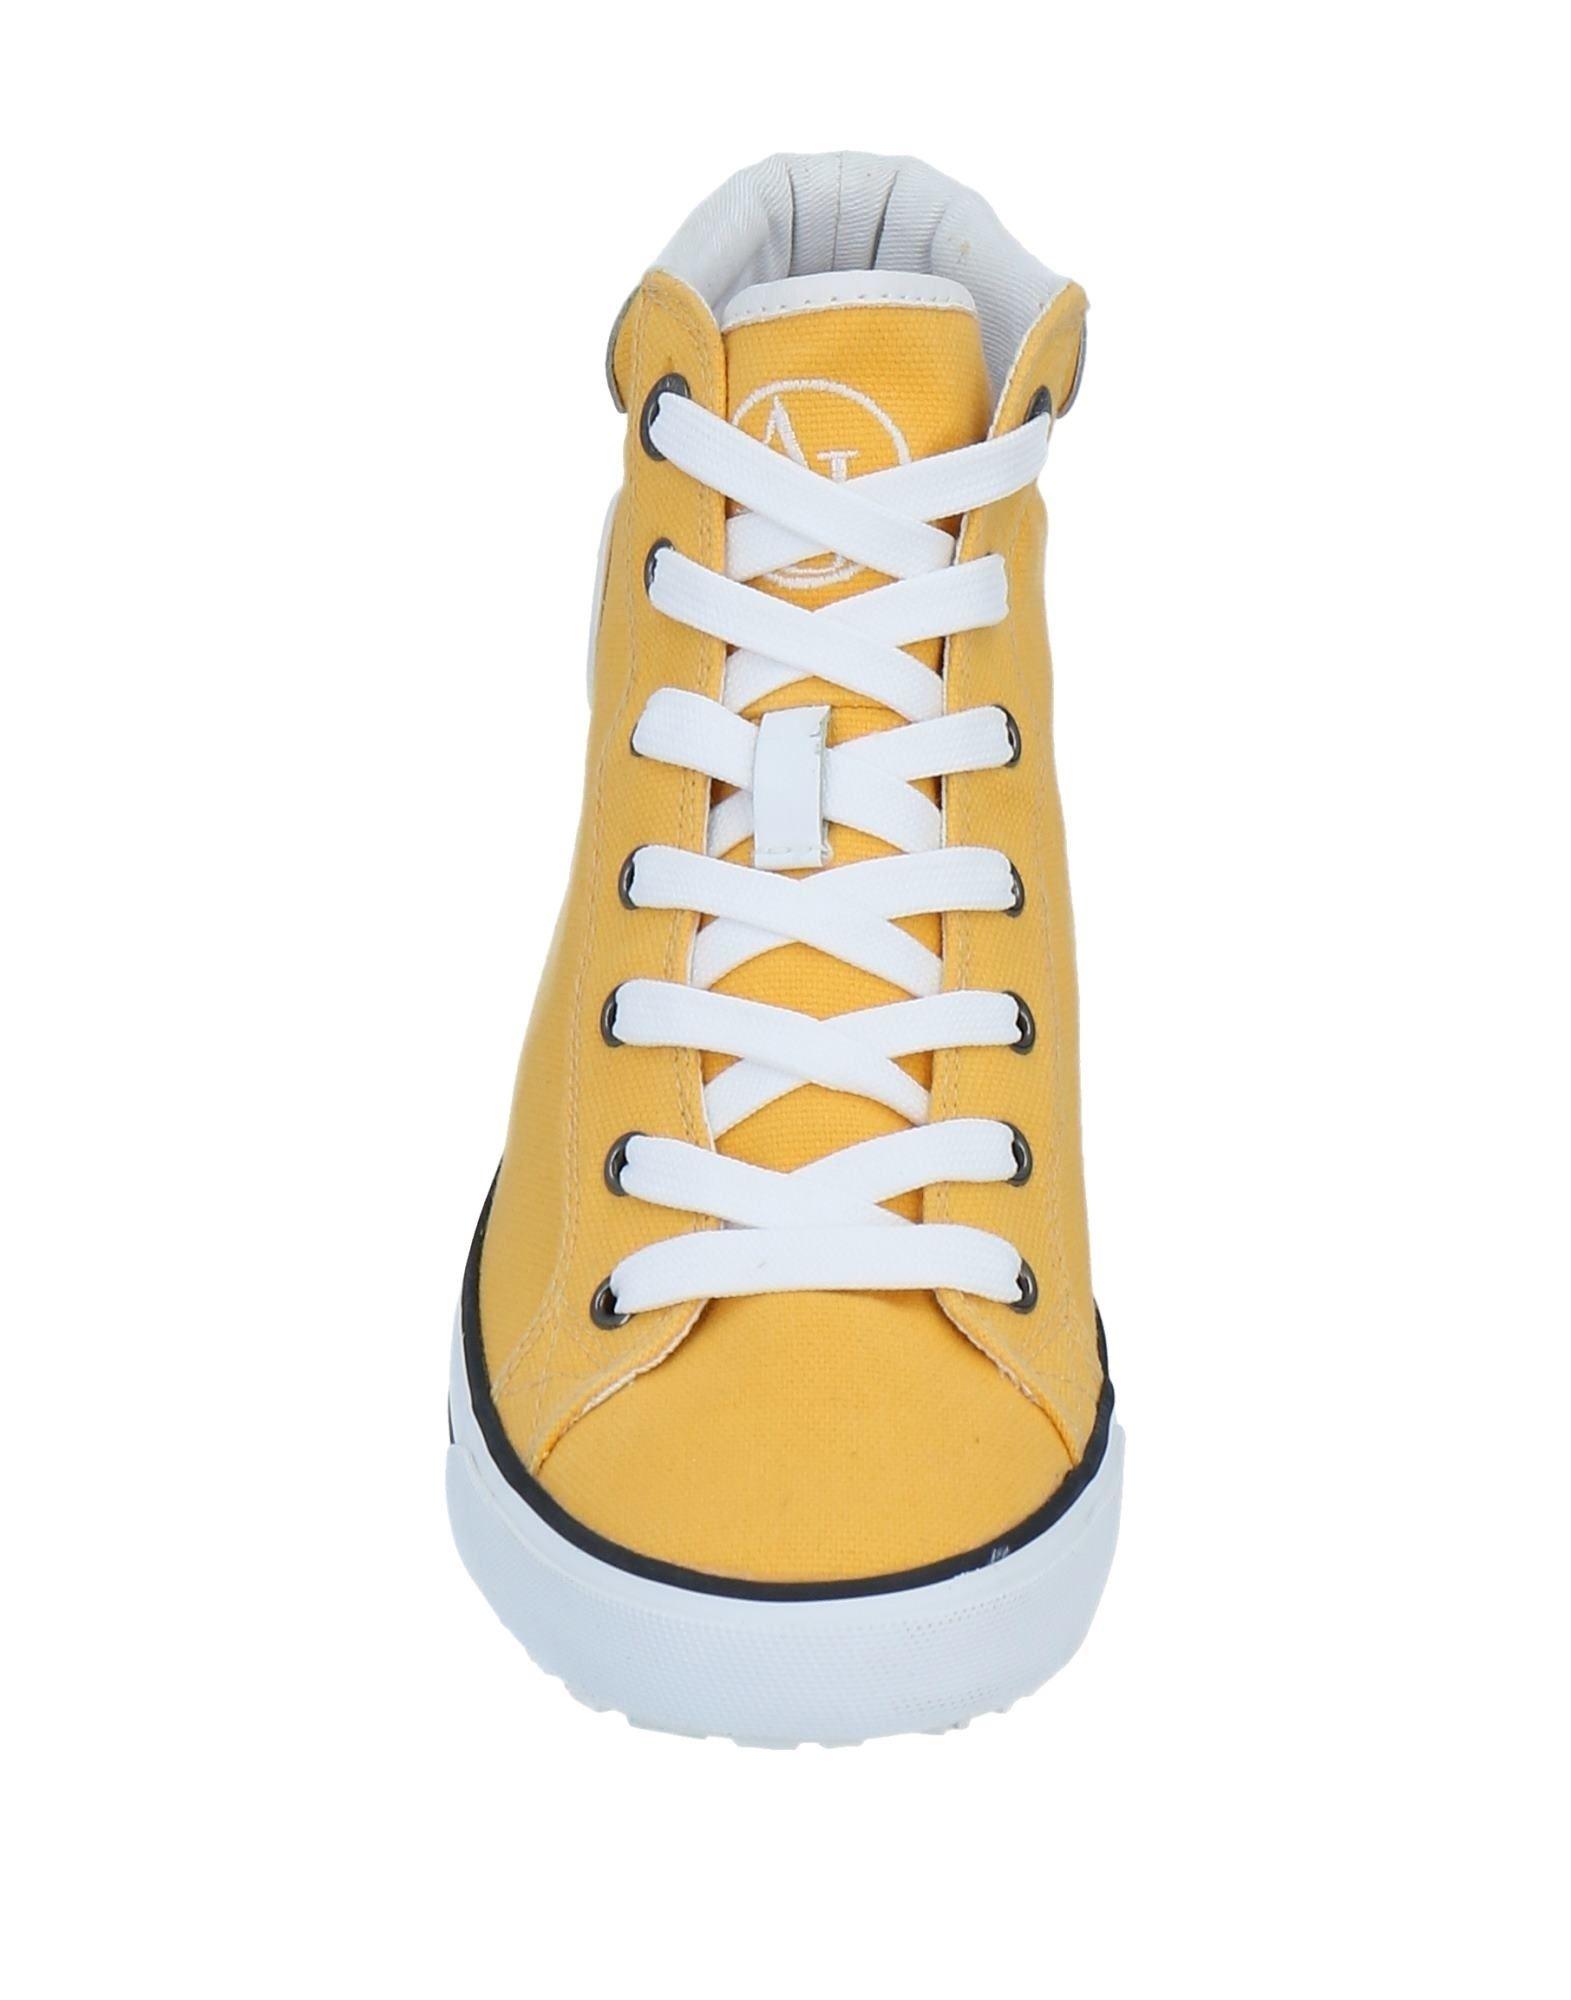 Armani Jeans Leather Sneakers in Yellow | Lyst